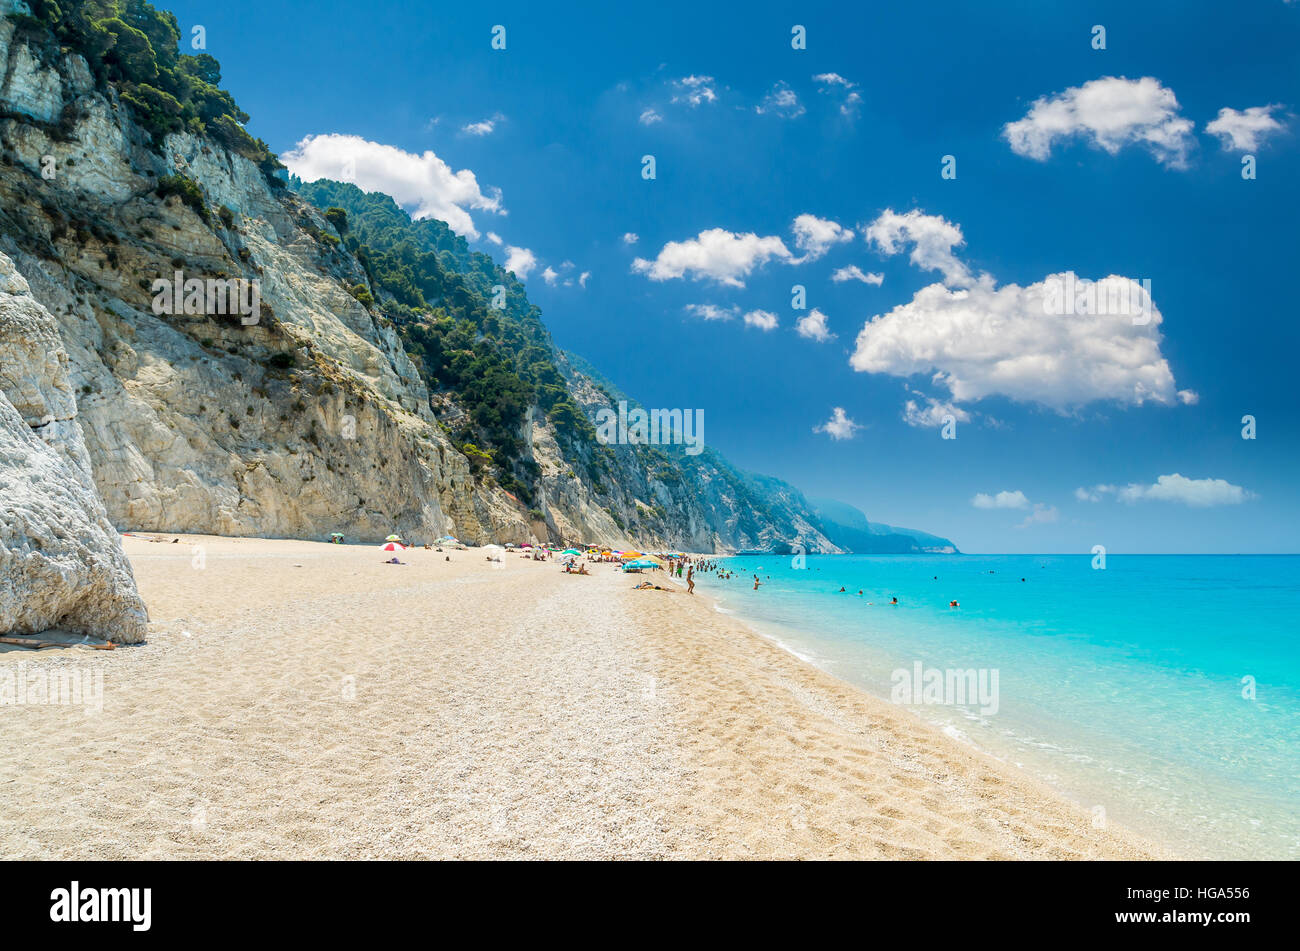 Egremni beach, Lefkada island, Greece. Large and long beach with turquoise water on the island of Lefkada in Greece Stock Photo